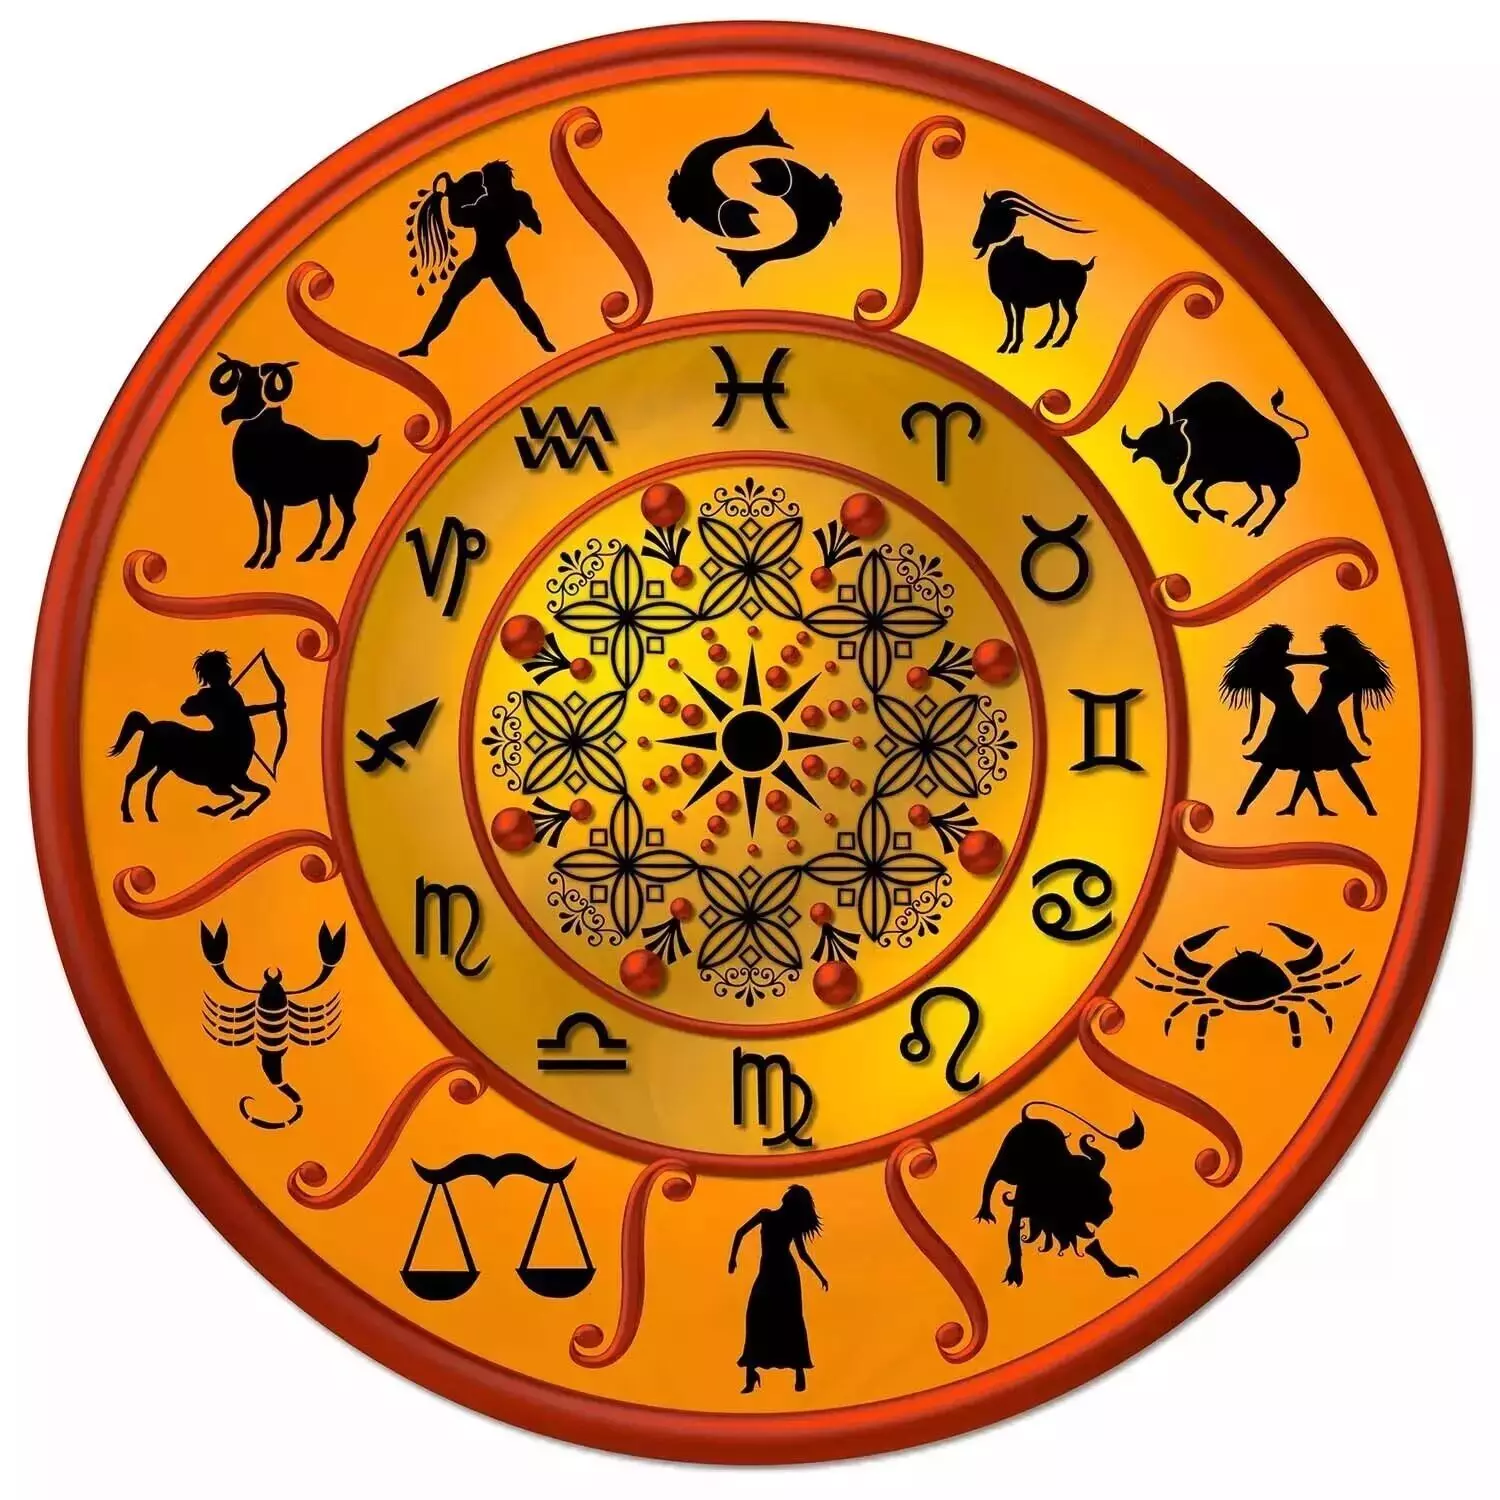 26 May – Know your todays horoscope